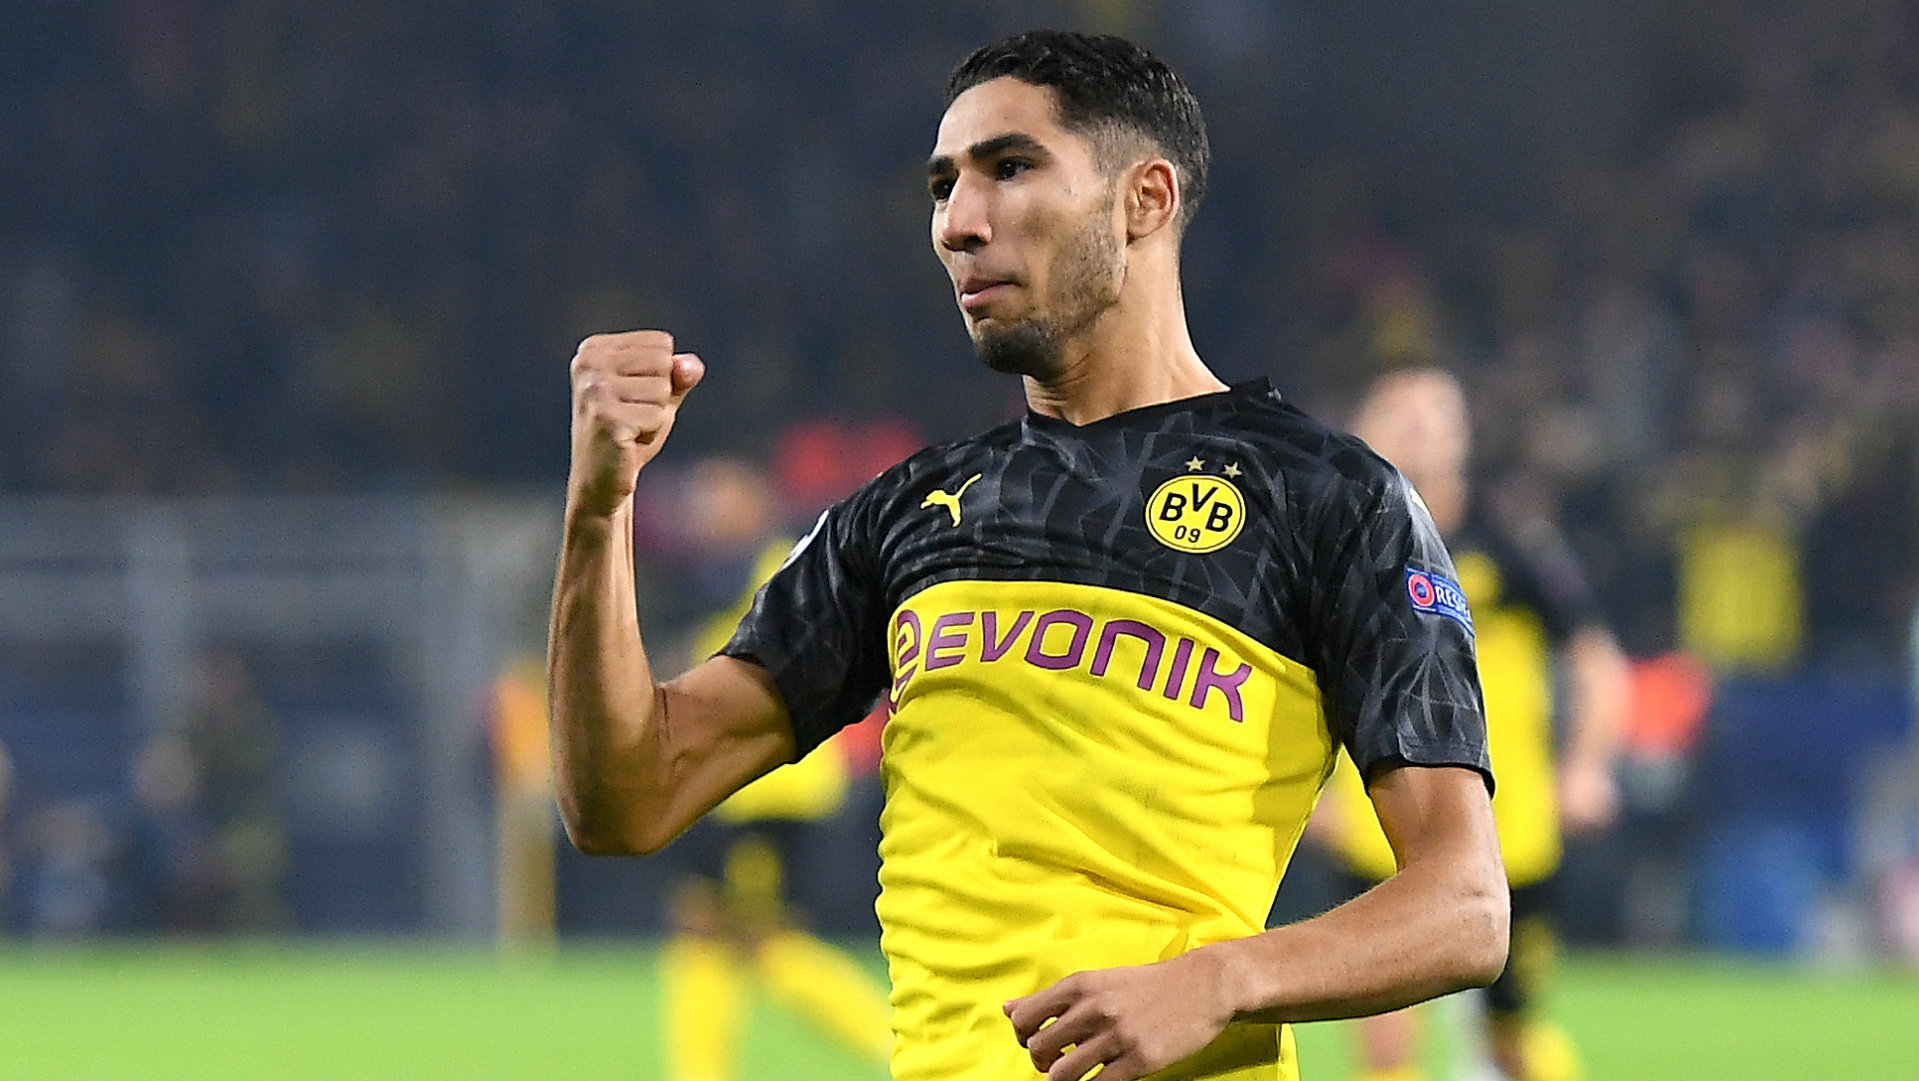 'Everybody needs the same justice' - Inter-bound Hakimi on supporting Black Lives Matter in Dortmund celebration